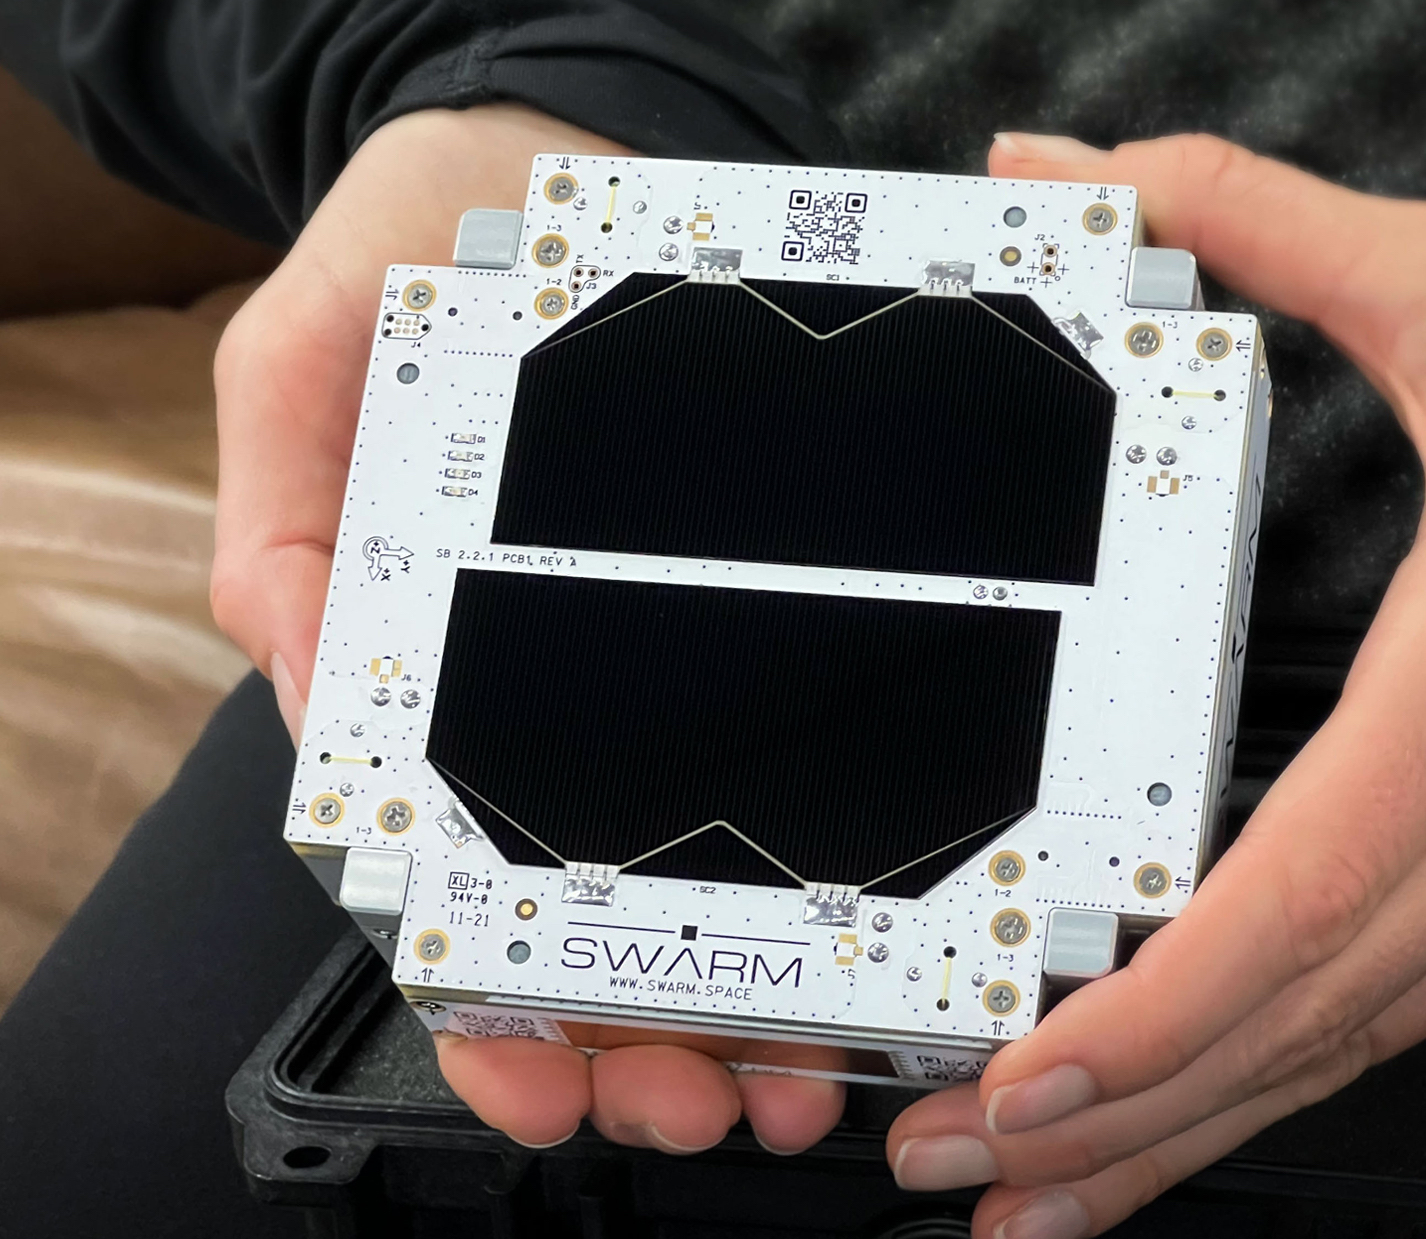 Swarm is Stopping New Device Sale—Is this to Anticipate SpaceX’s Satellite-to-Cell Service?